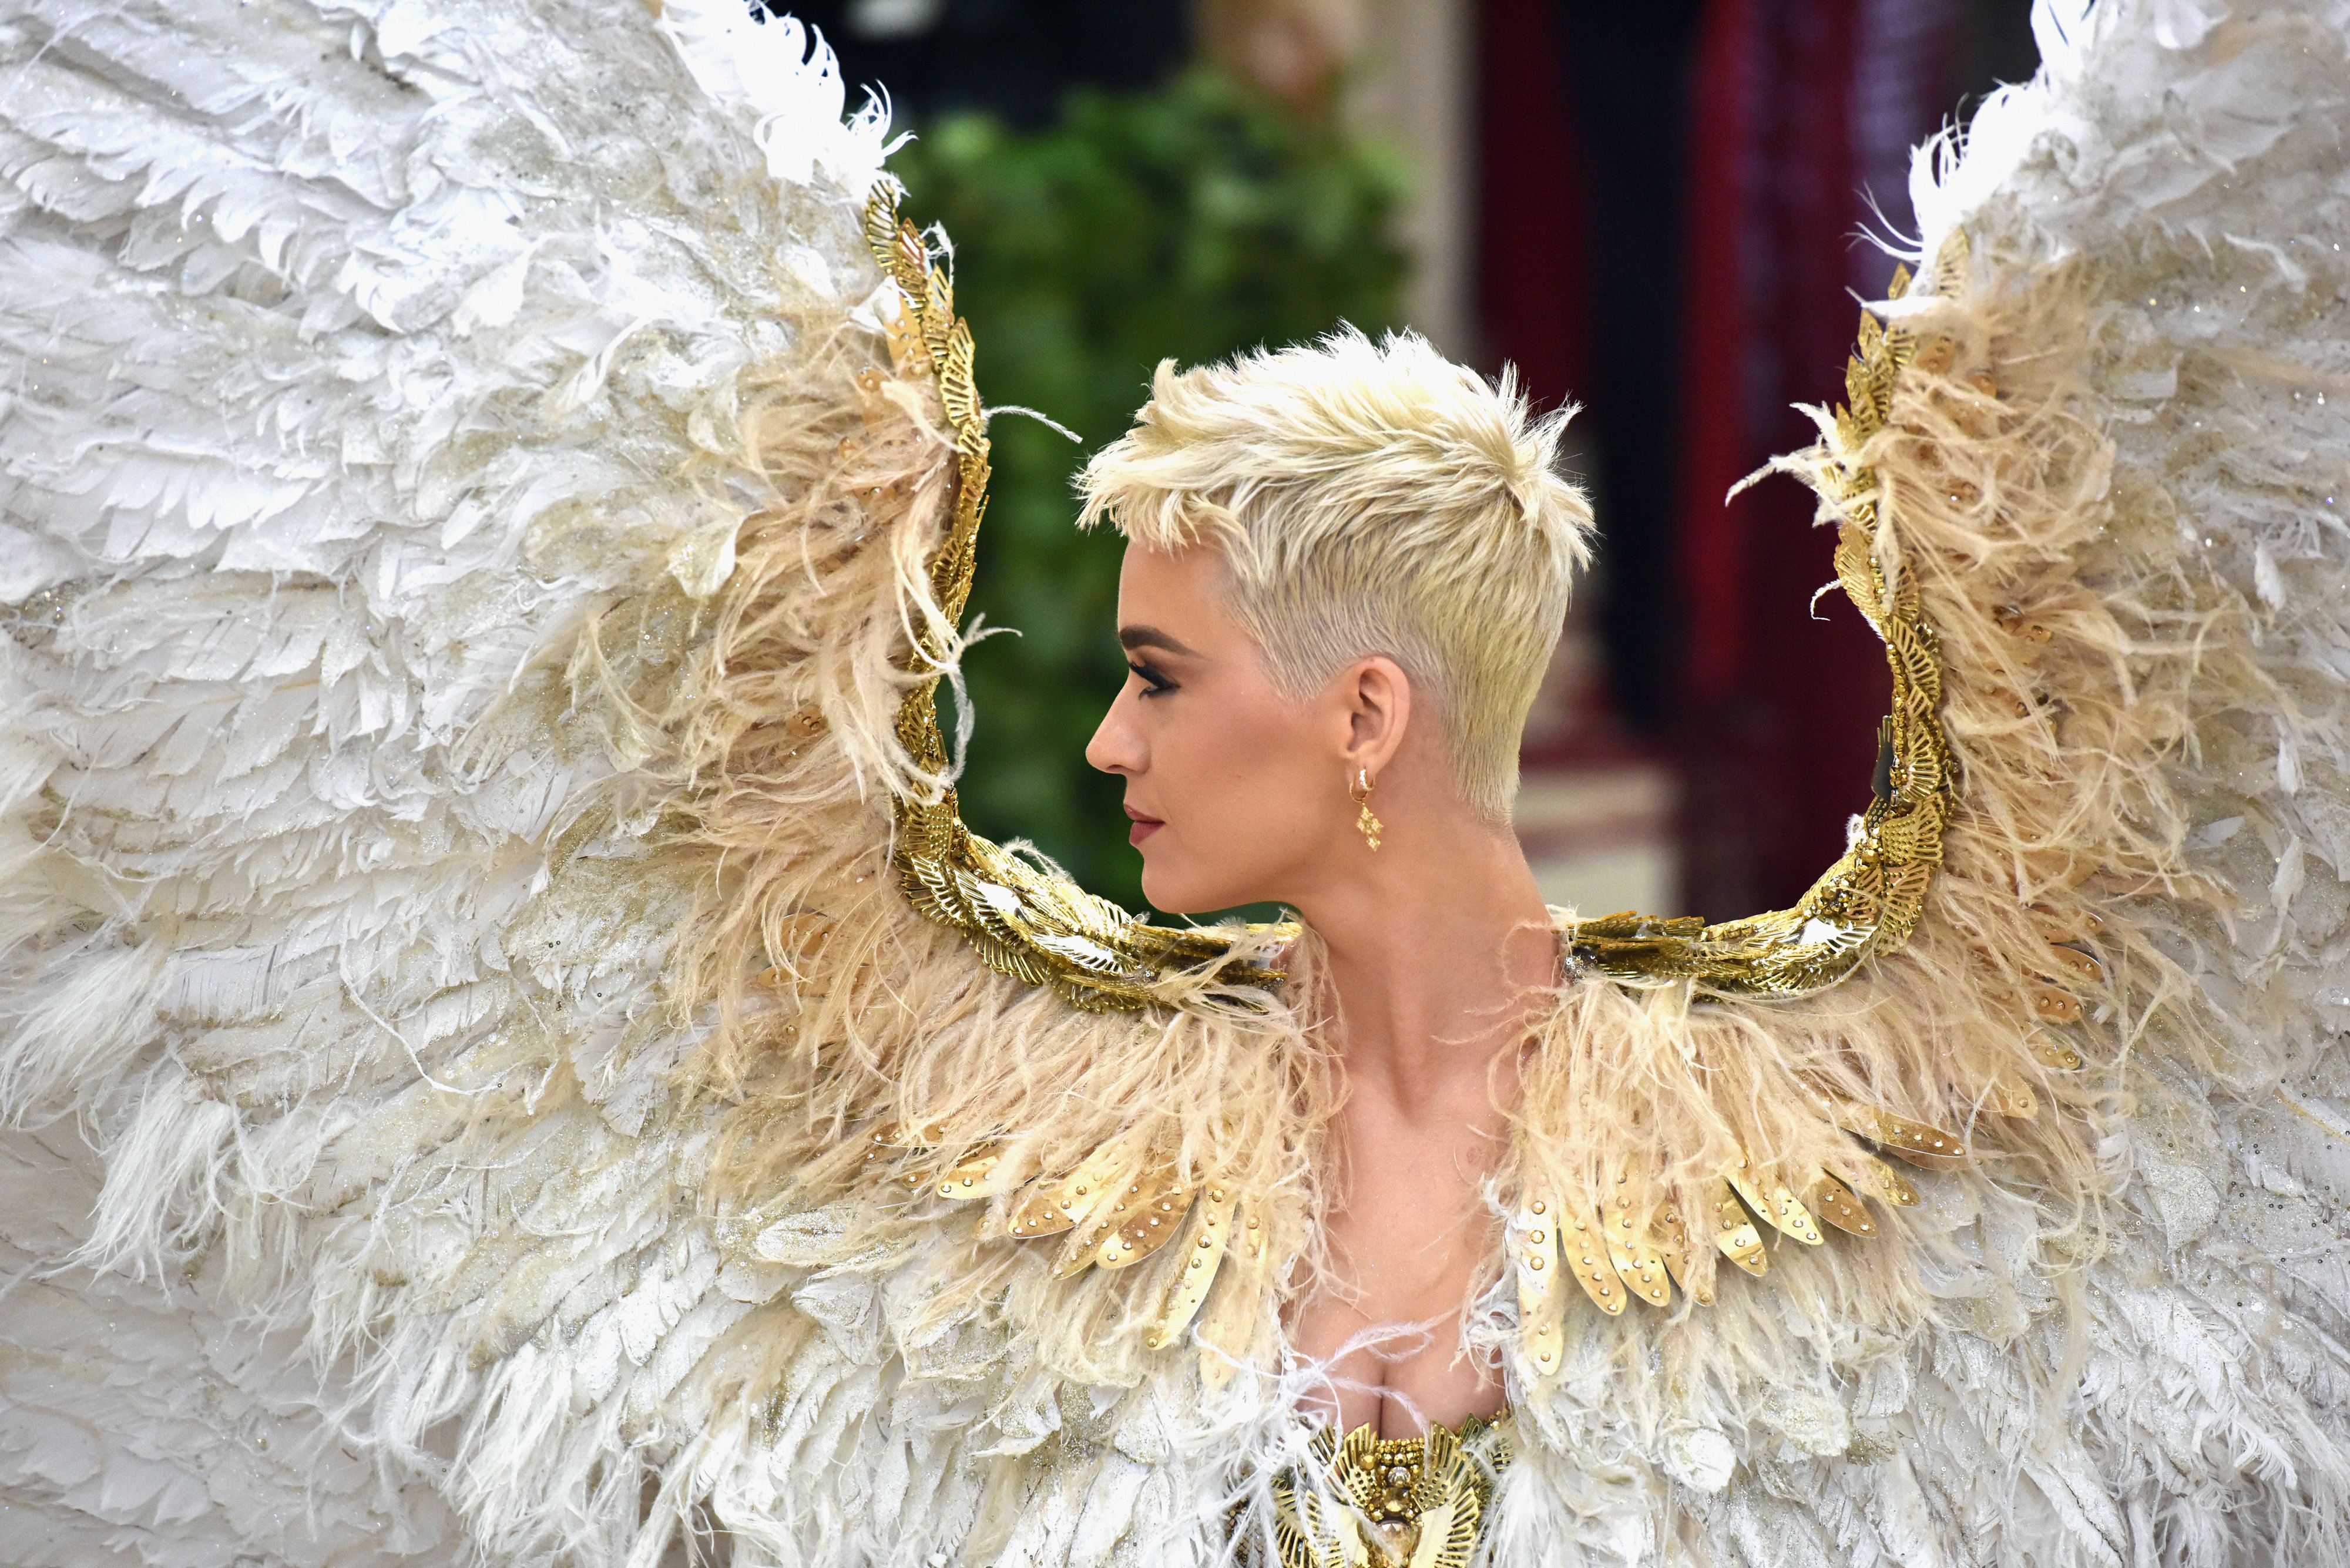 Met Gala Theme 2018: How Will Fashion And Religion Be Tackled?